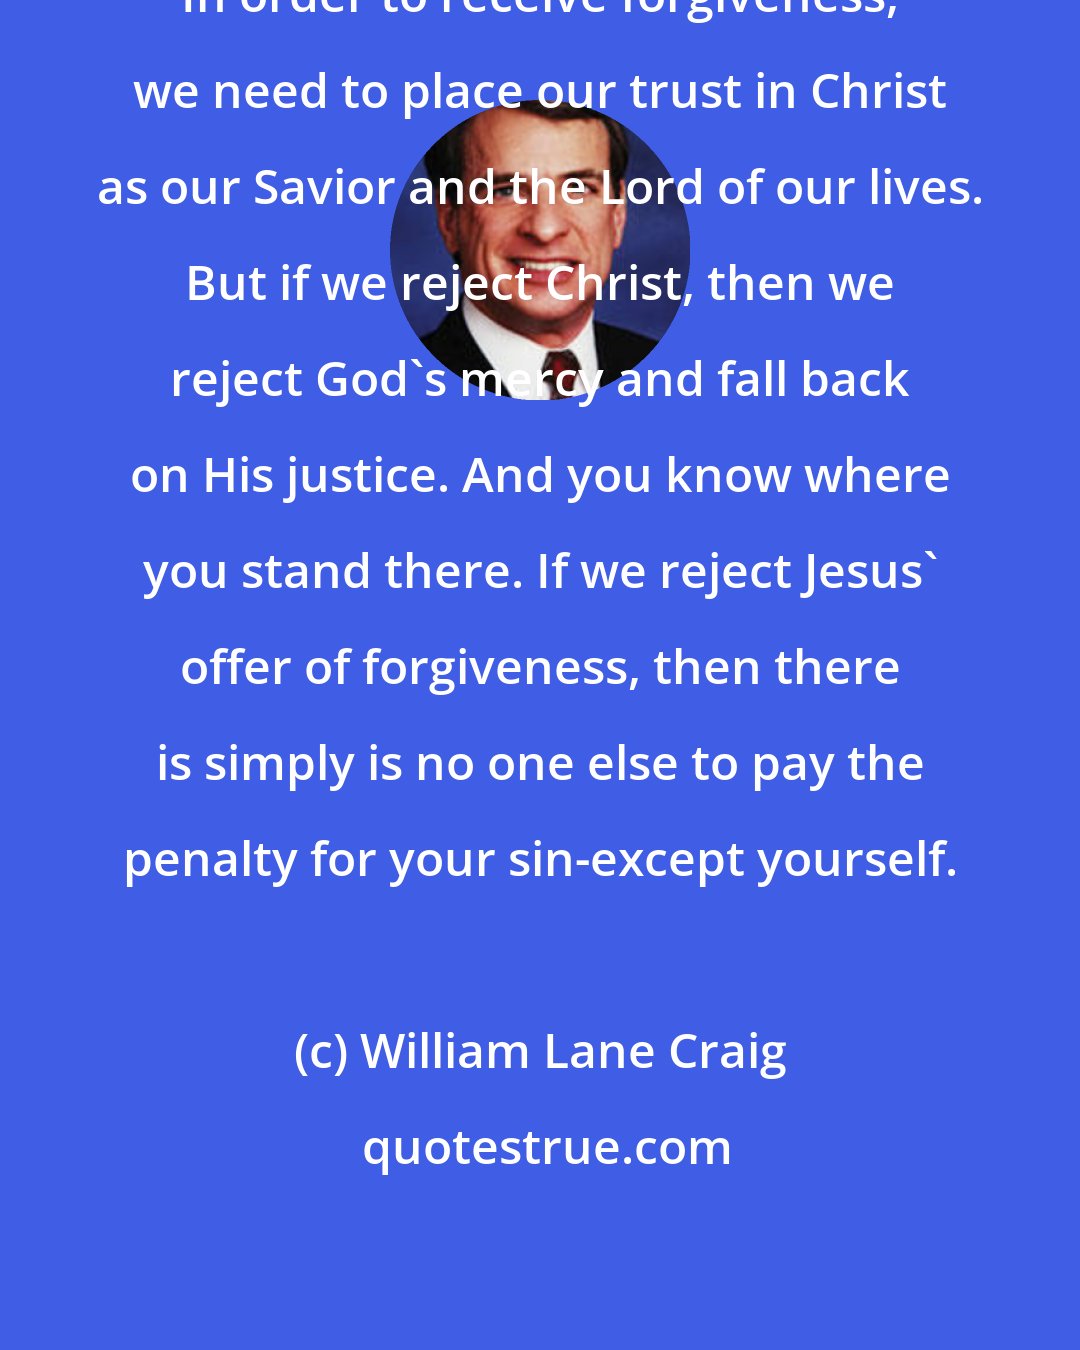 William Lane Craig: In order to receive forgiveness, we need to place our trust in Christ as our Savior and the Lord of our lives. But if we reject Christ, then we reject God's mercy and fall back on His justice. And you know where you stand there. If we reject Jesus' offer of forgiveness, then there is simply is no one else to pay the penalty for your sin-except yourself.